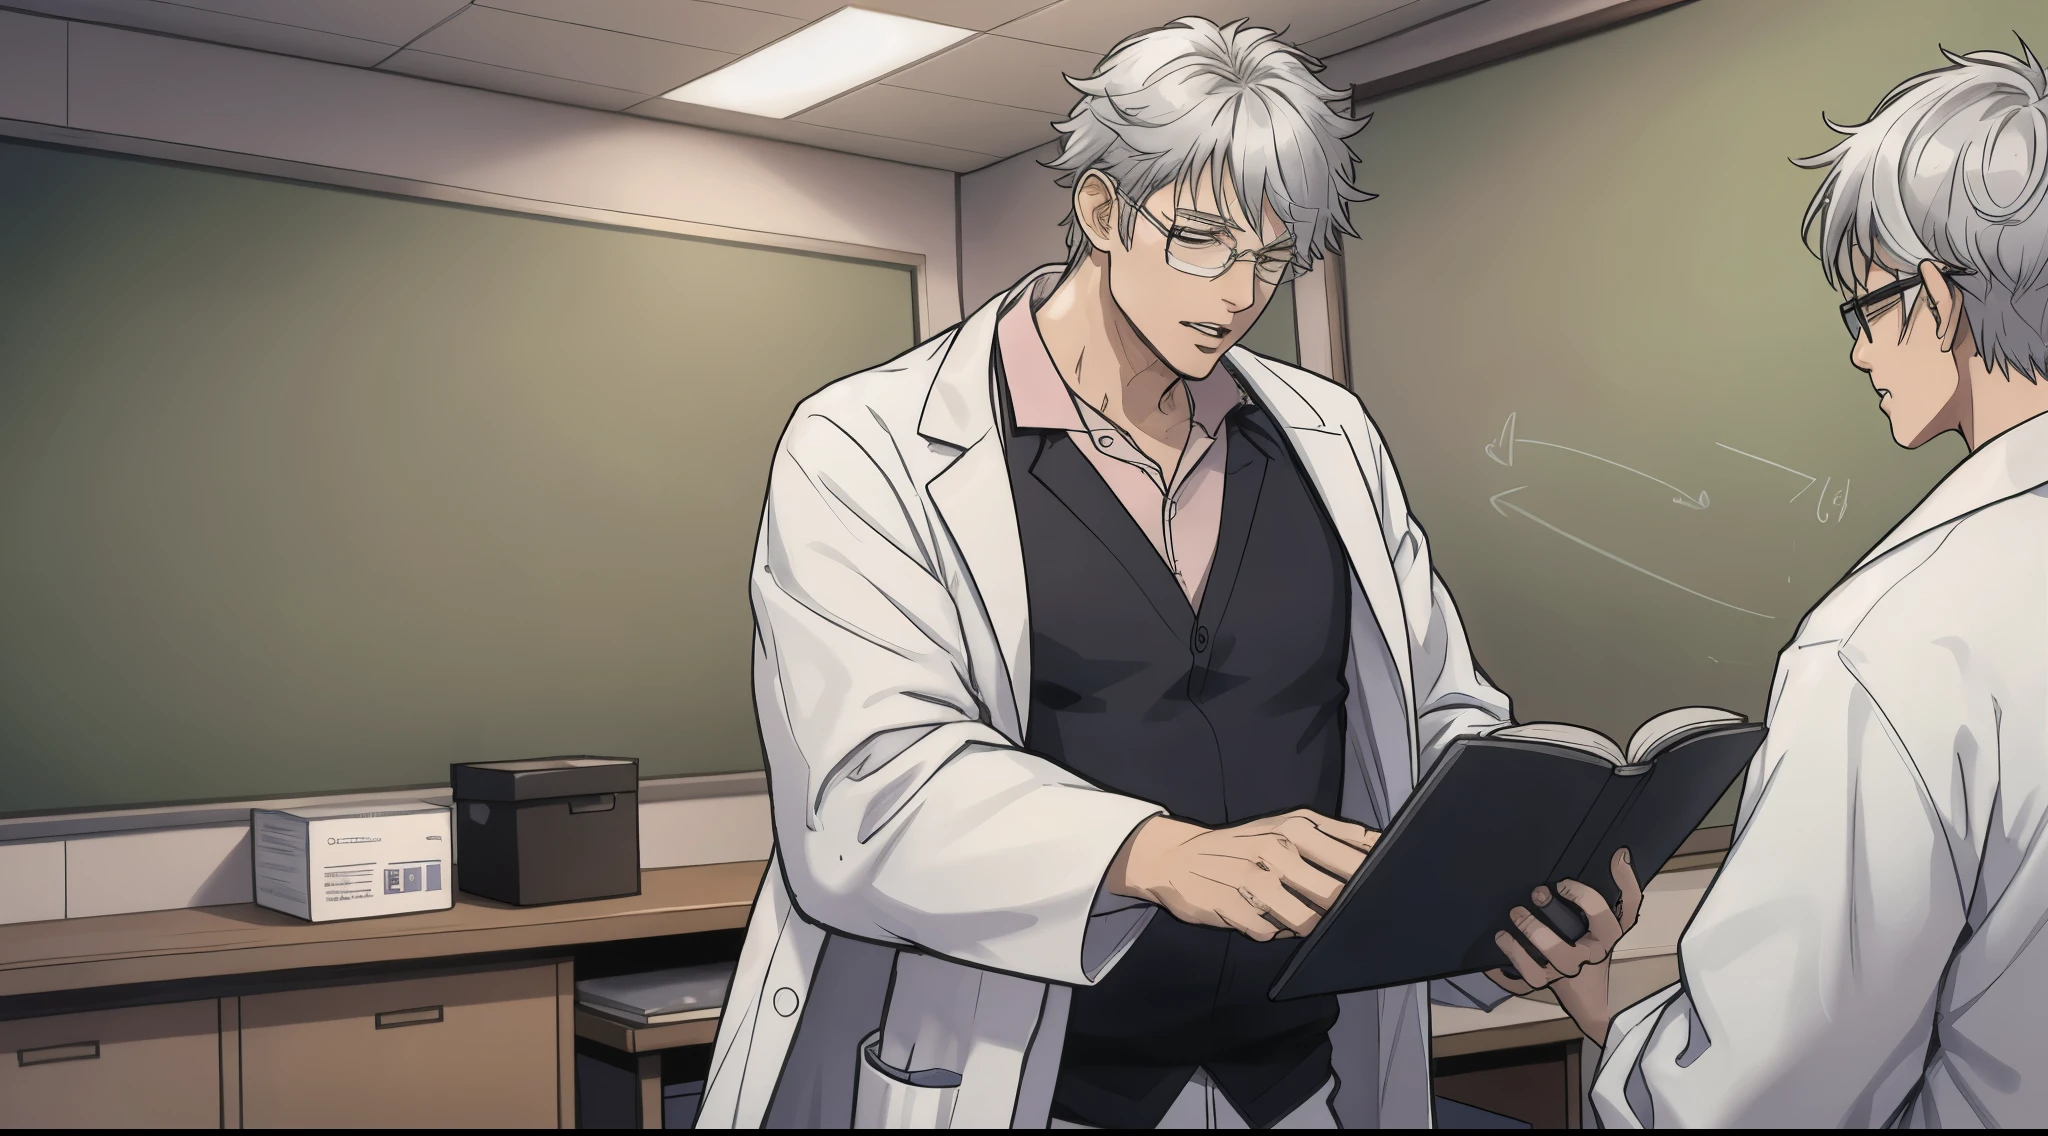 Silver haired teacher wearing lab coat and medical glasses, he is talking and moving his lips